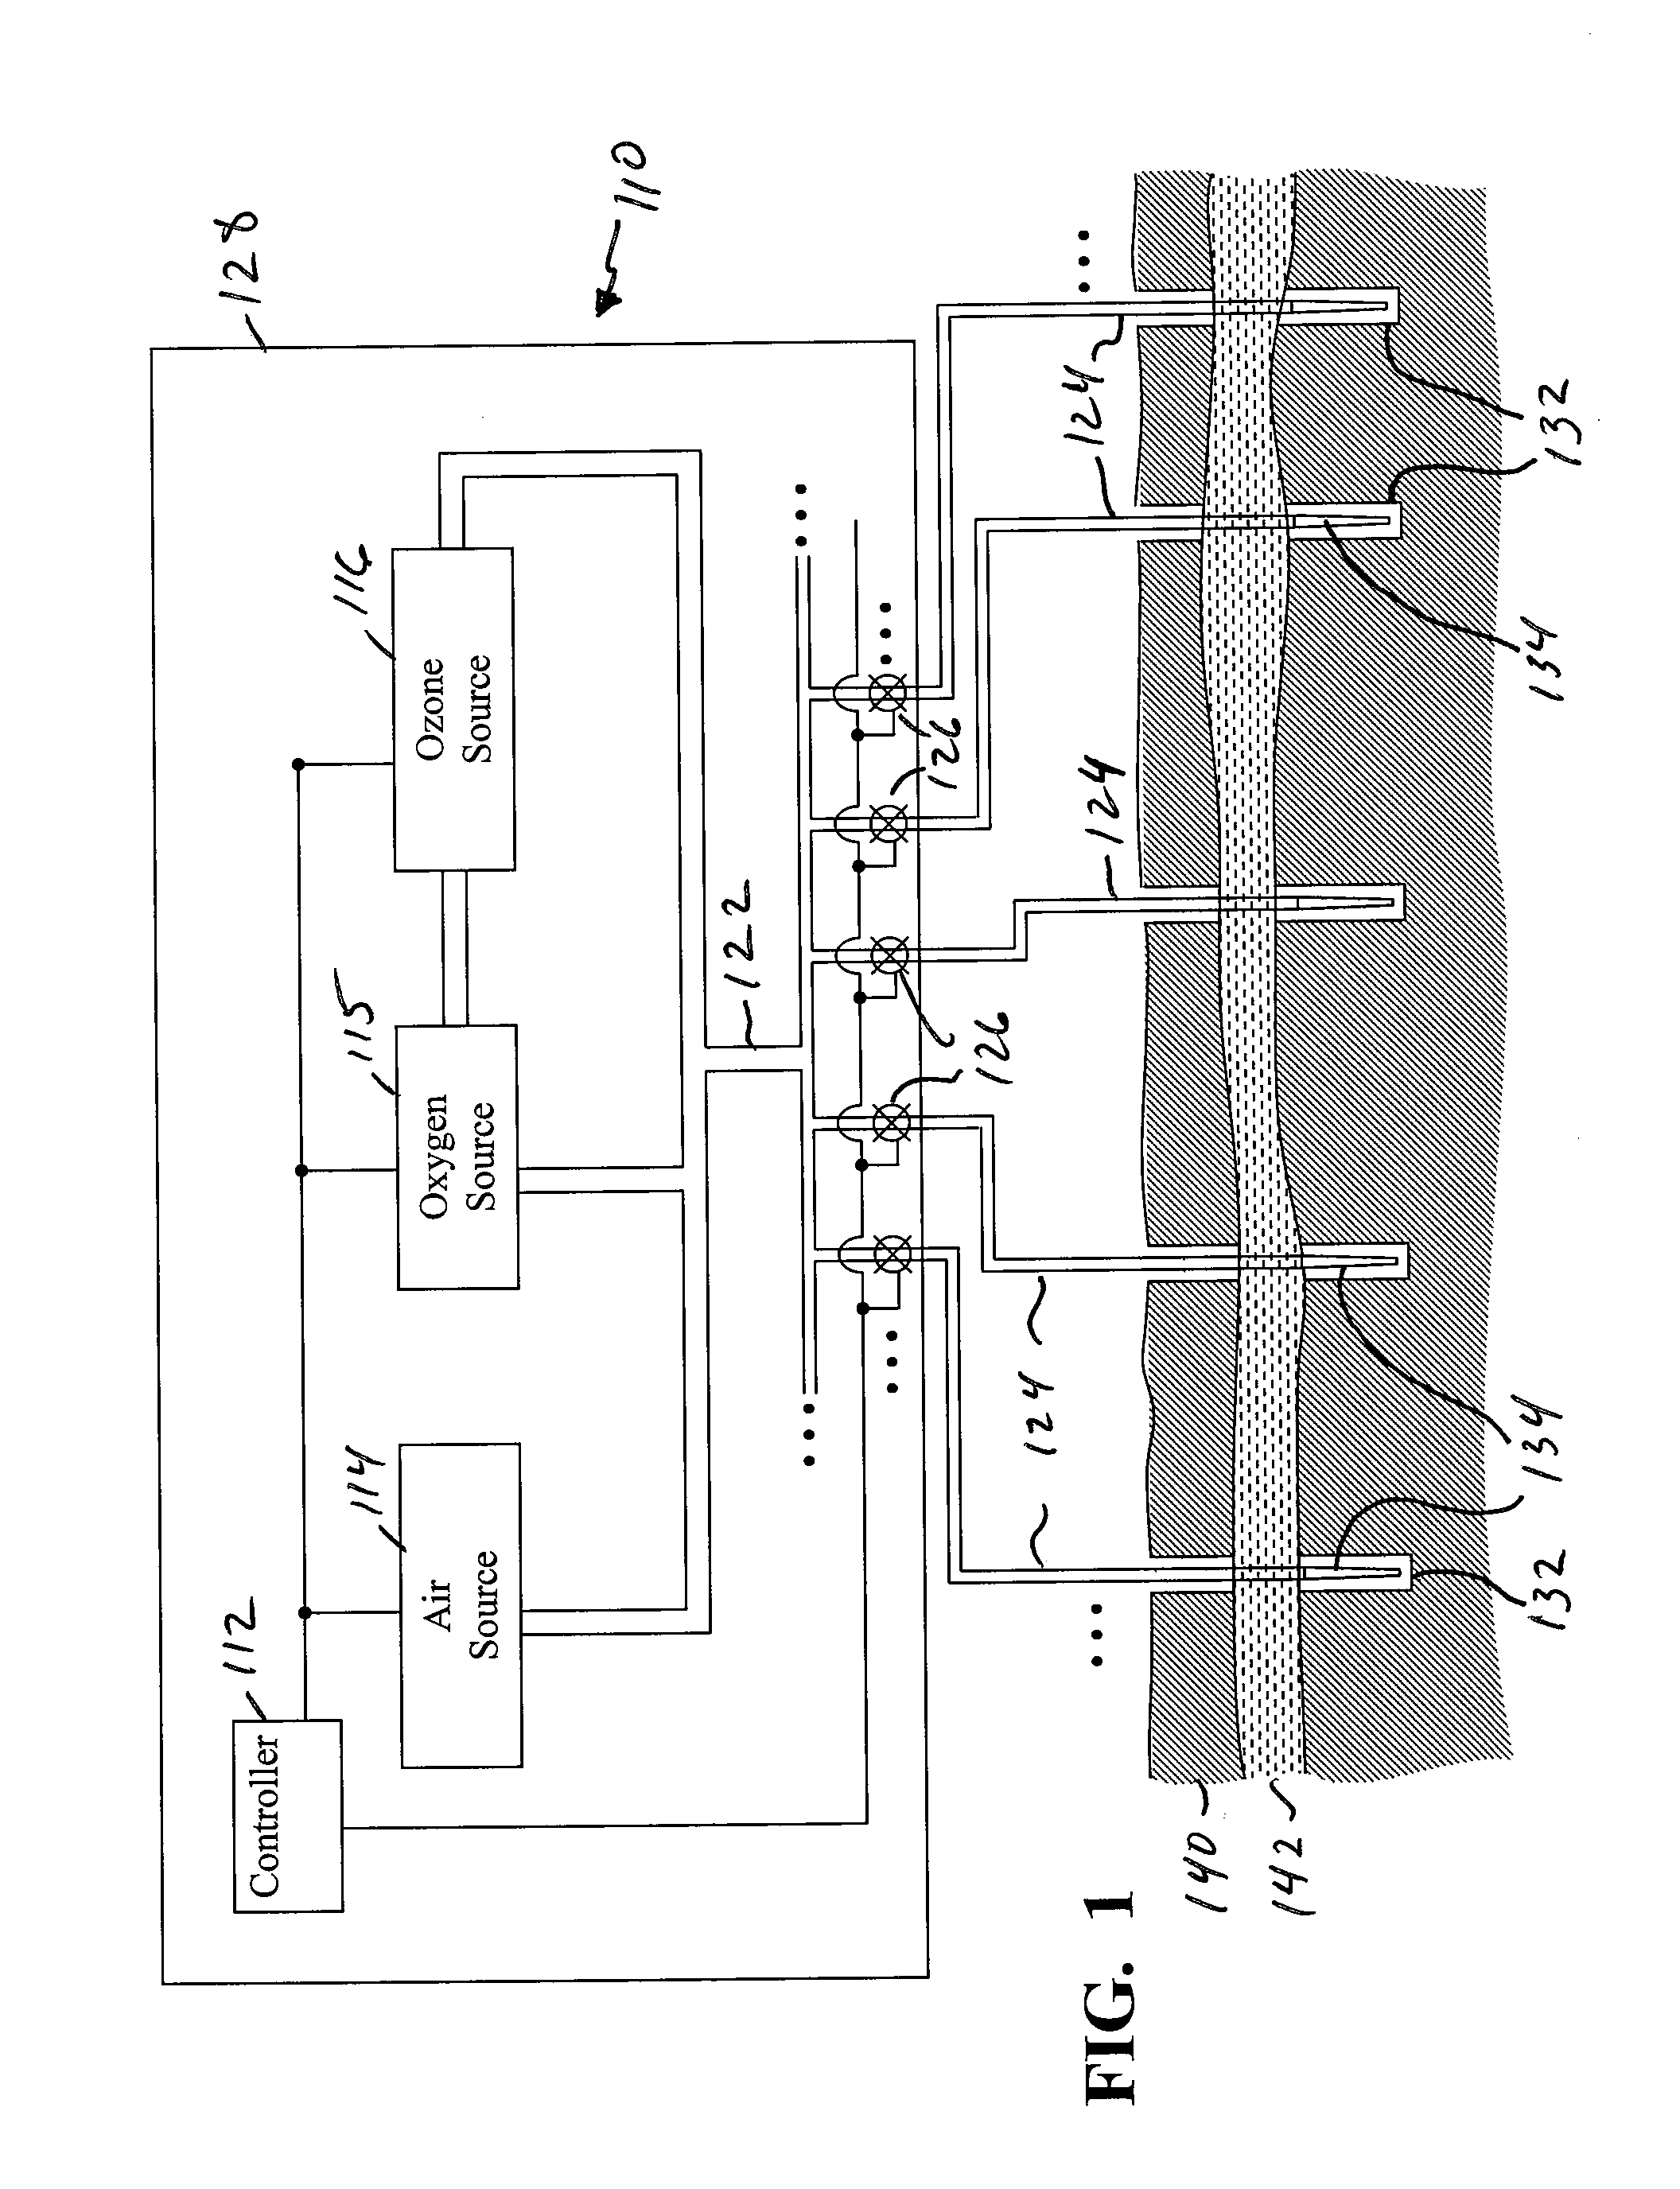 Systems, methods and processes for use in providing remediation of contaminated groundwater and/or soil